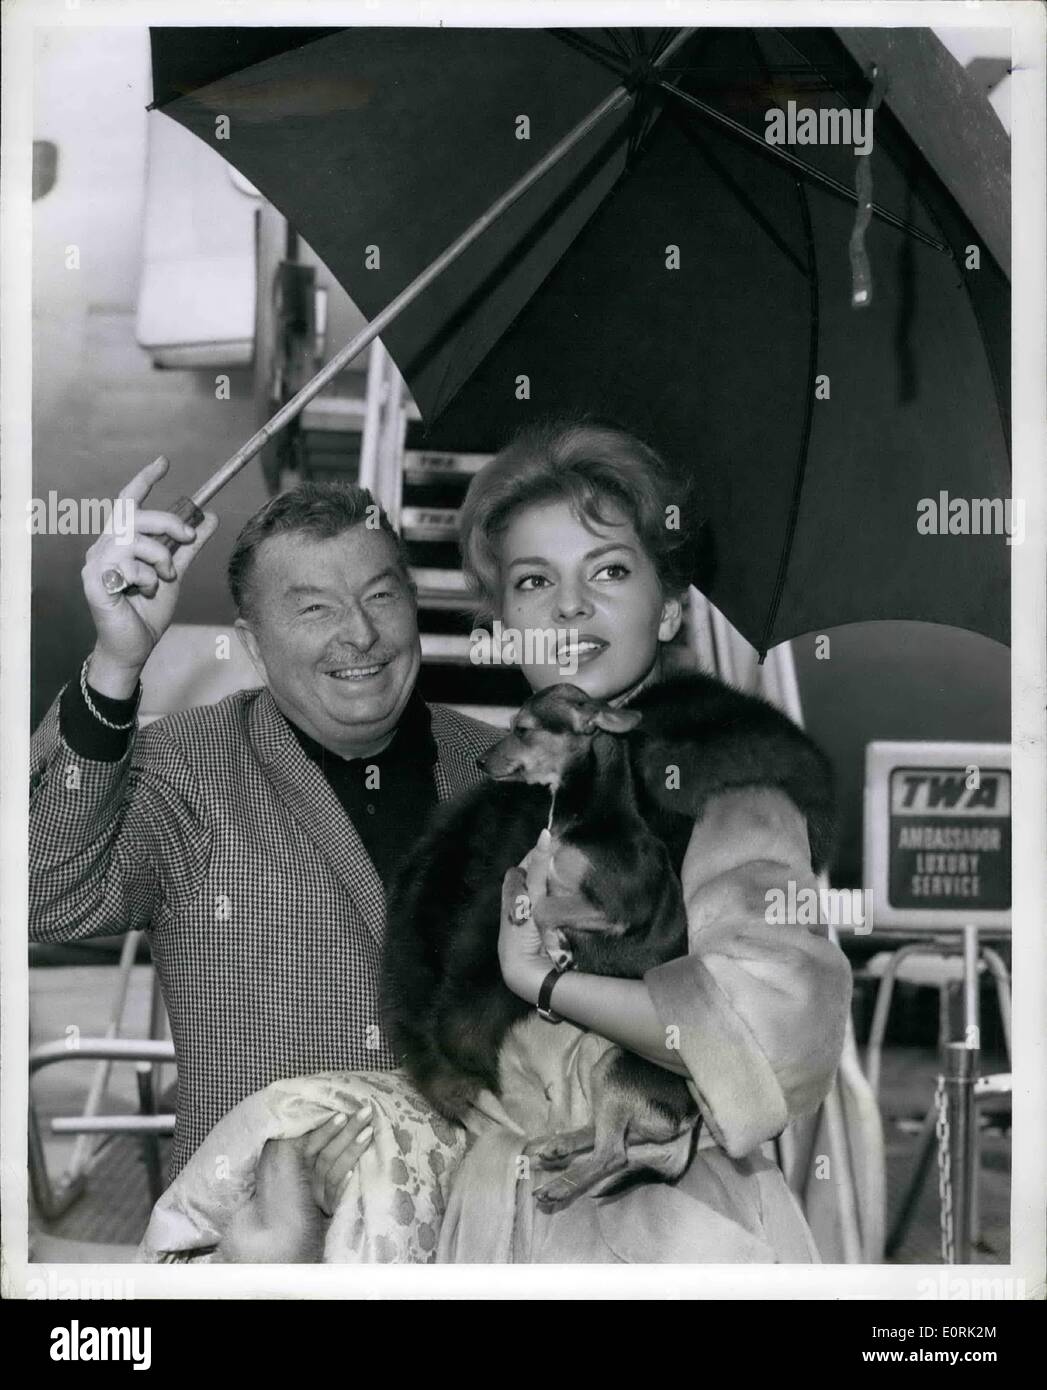 Dec. 12, 1959 - Our Fog covered airport received a bright lift in the from of lovely Abbe Lane pictured here with her husband, Xavier Cugat and their pet ''Susie'' prior to boarding a TWA liner to Los Angeles. They will be back with us in four weeks after they complete a night club engagement in Palm springs, California. Stock Photo